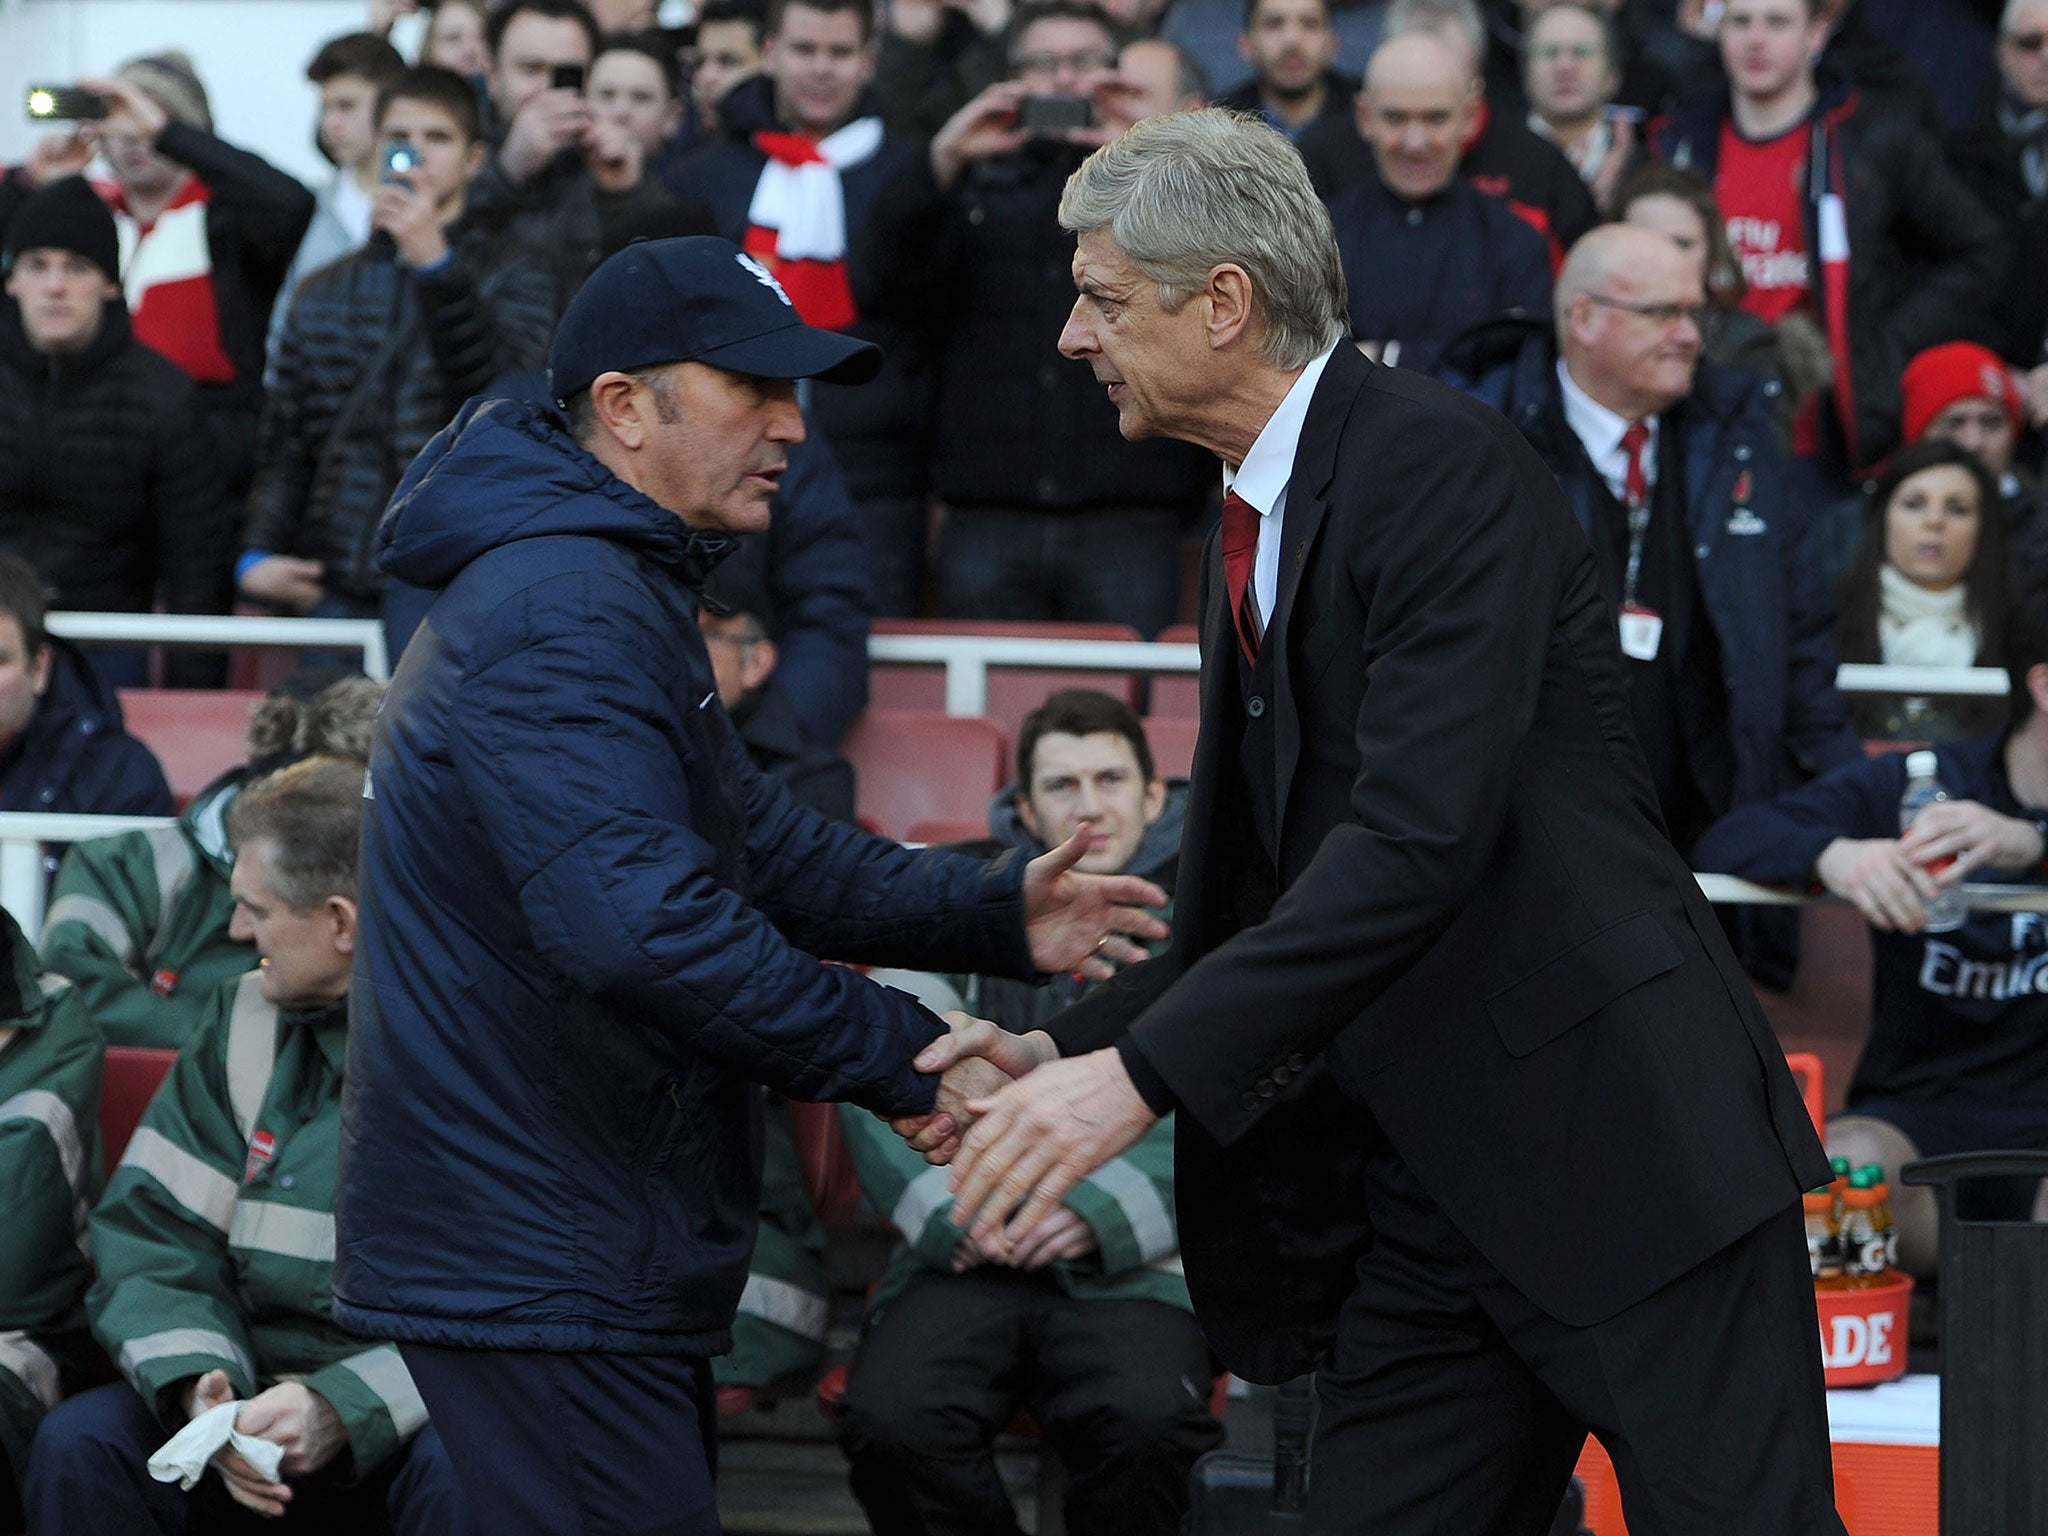 Tony Pulis and Arsene Wenger shake hands during the match between Crystal Palace and Arsenal earlier this year